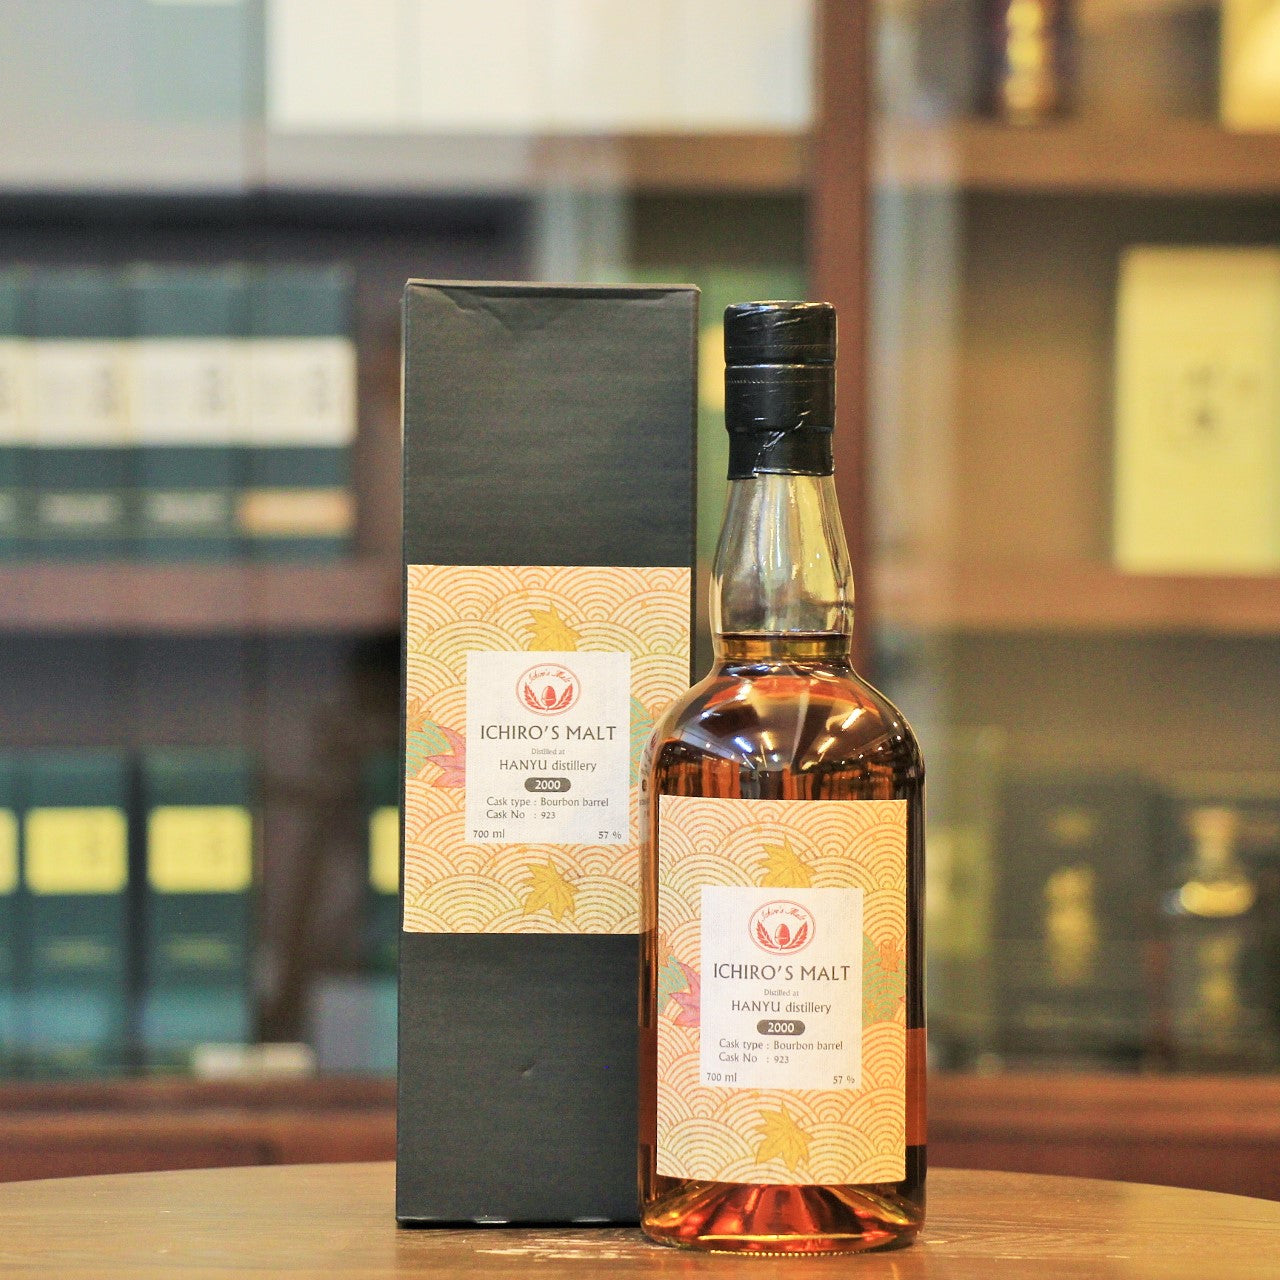 This Japanese single malt from Ichiro's Malt Hanyu Distillery is a single cask #923 bottling from the final year 2000 of Hanyu Distillery's operation. Distilled at Hanyu distillery, matured in Bourbon Barrel and bottled by Mr. Ichiro Akuto.